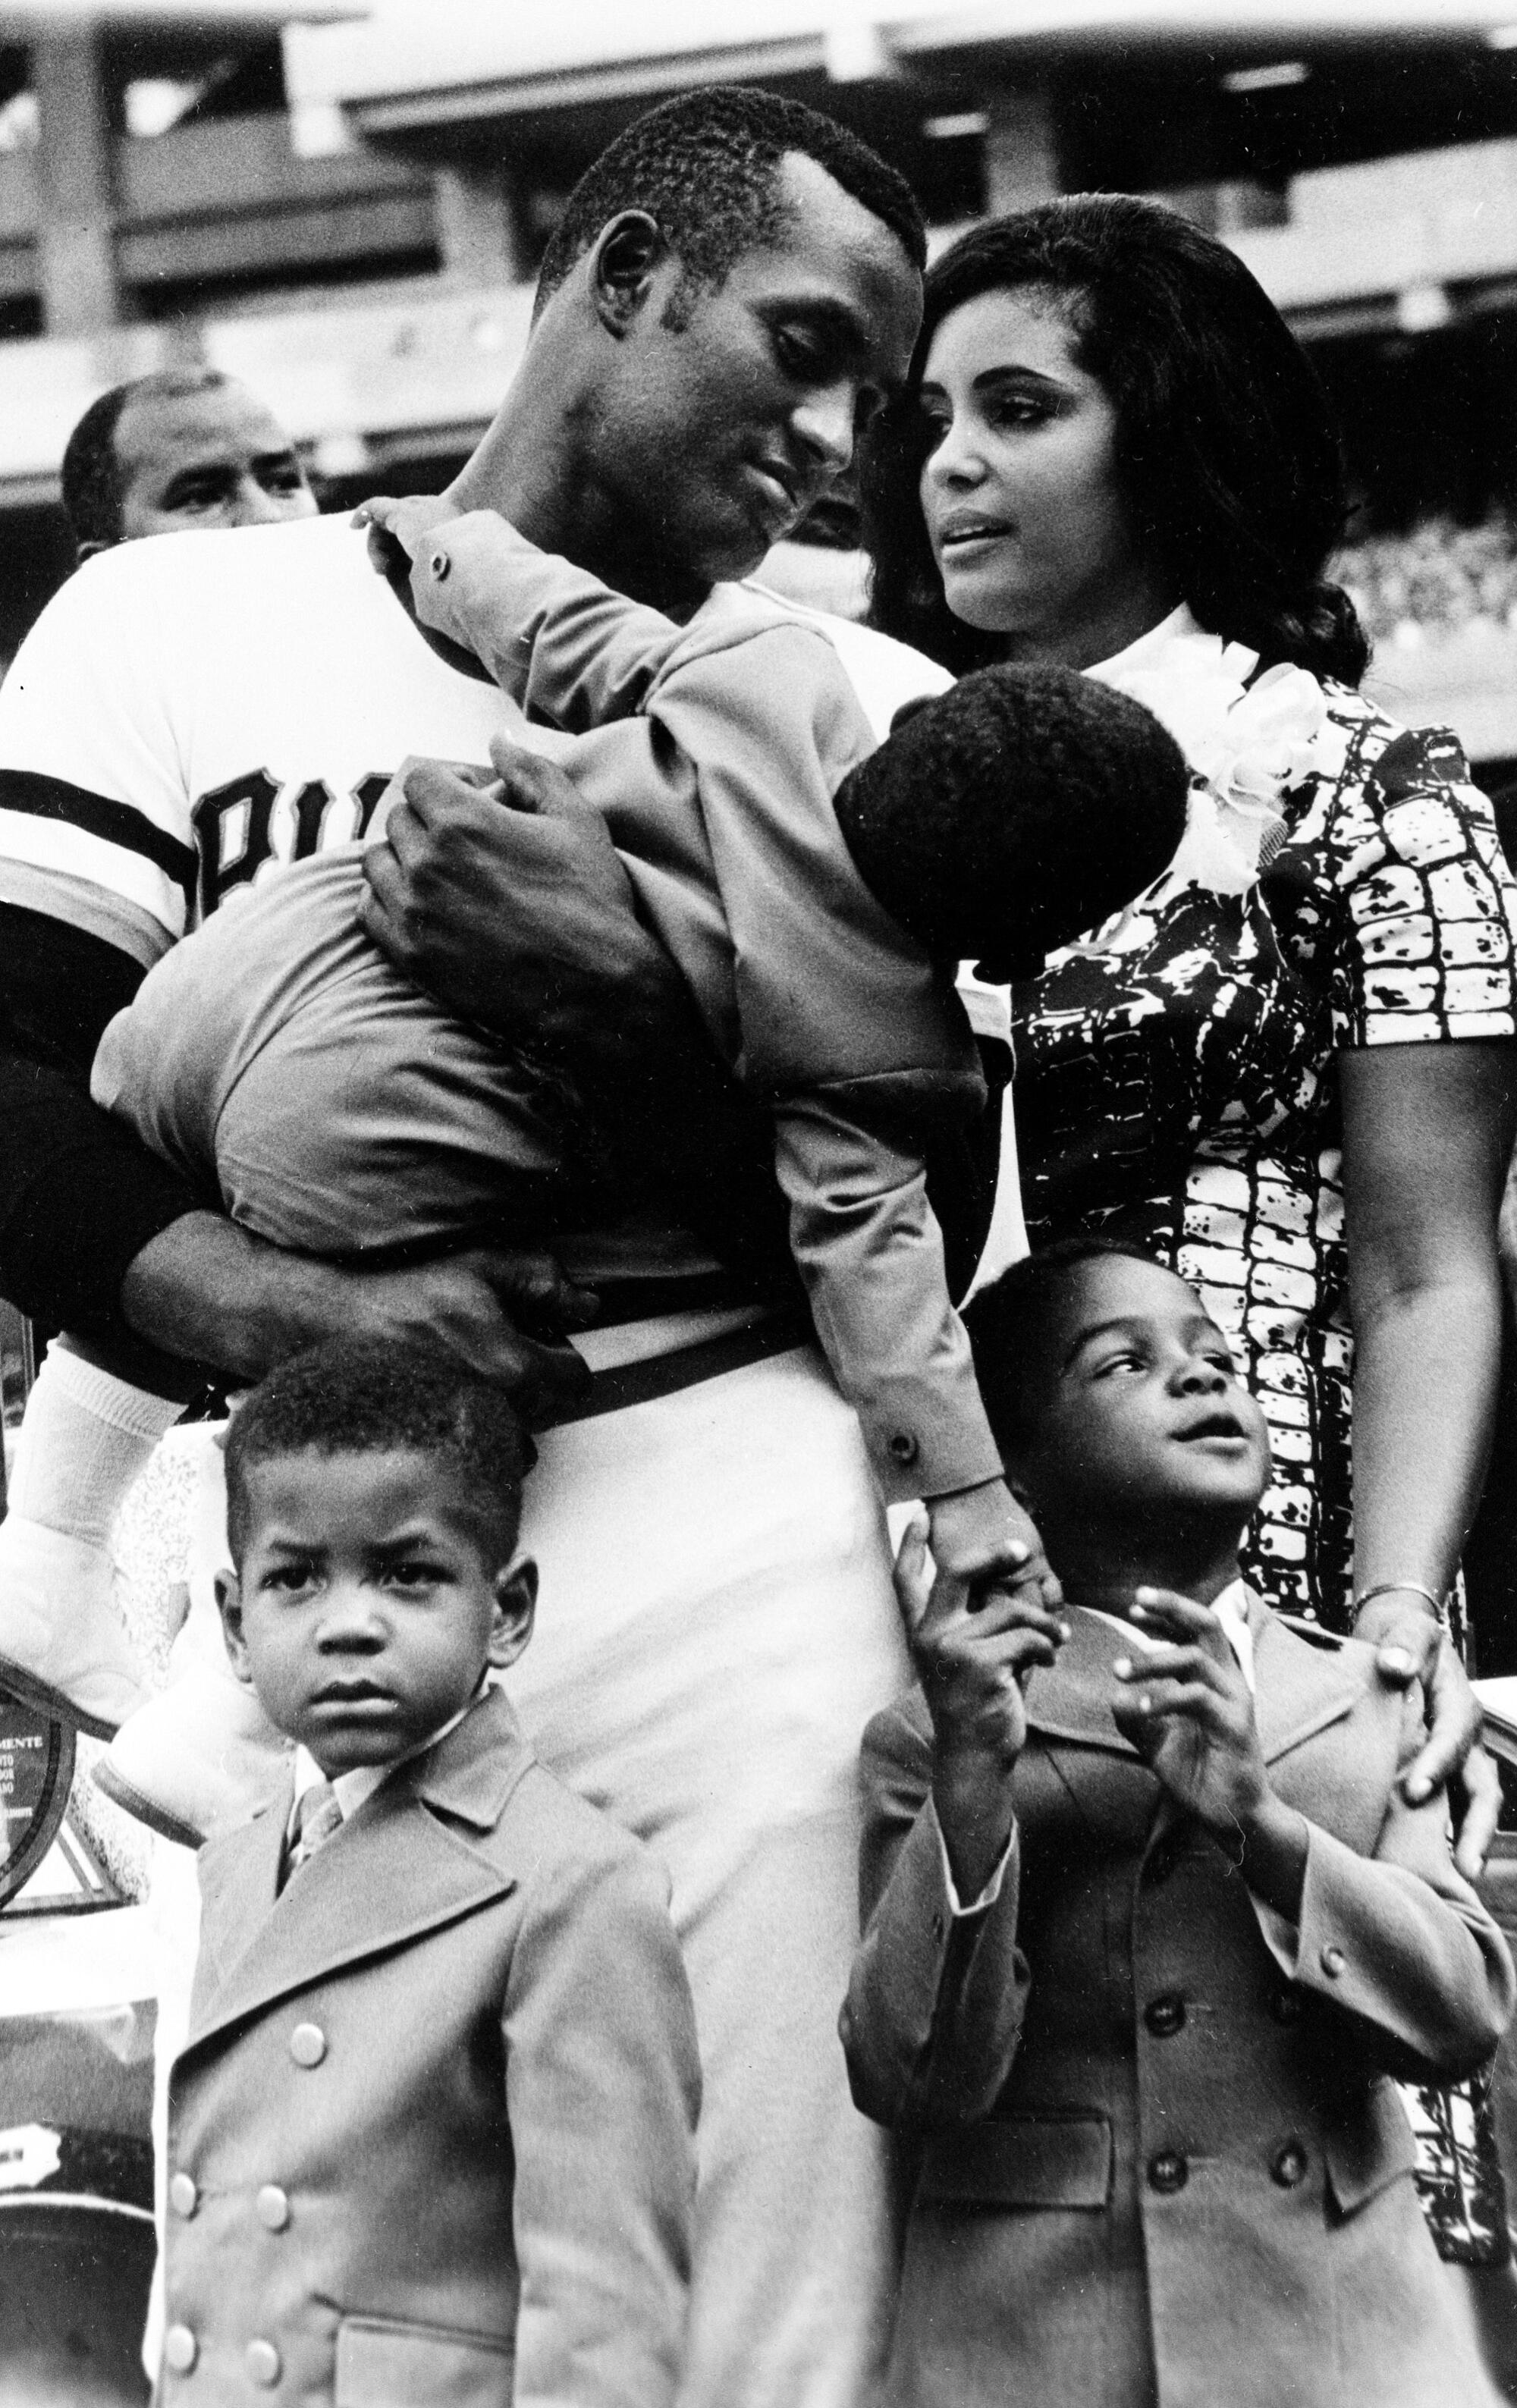 Roberto Clemente holds son Roberto Jr. while standing with his wife, Vera, and their two older sons Luis, left, and Enrique